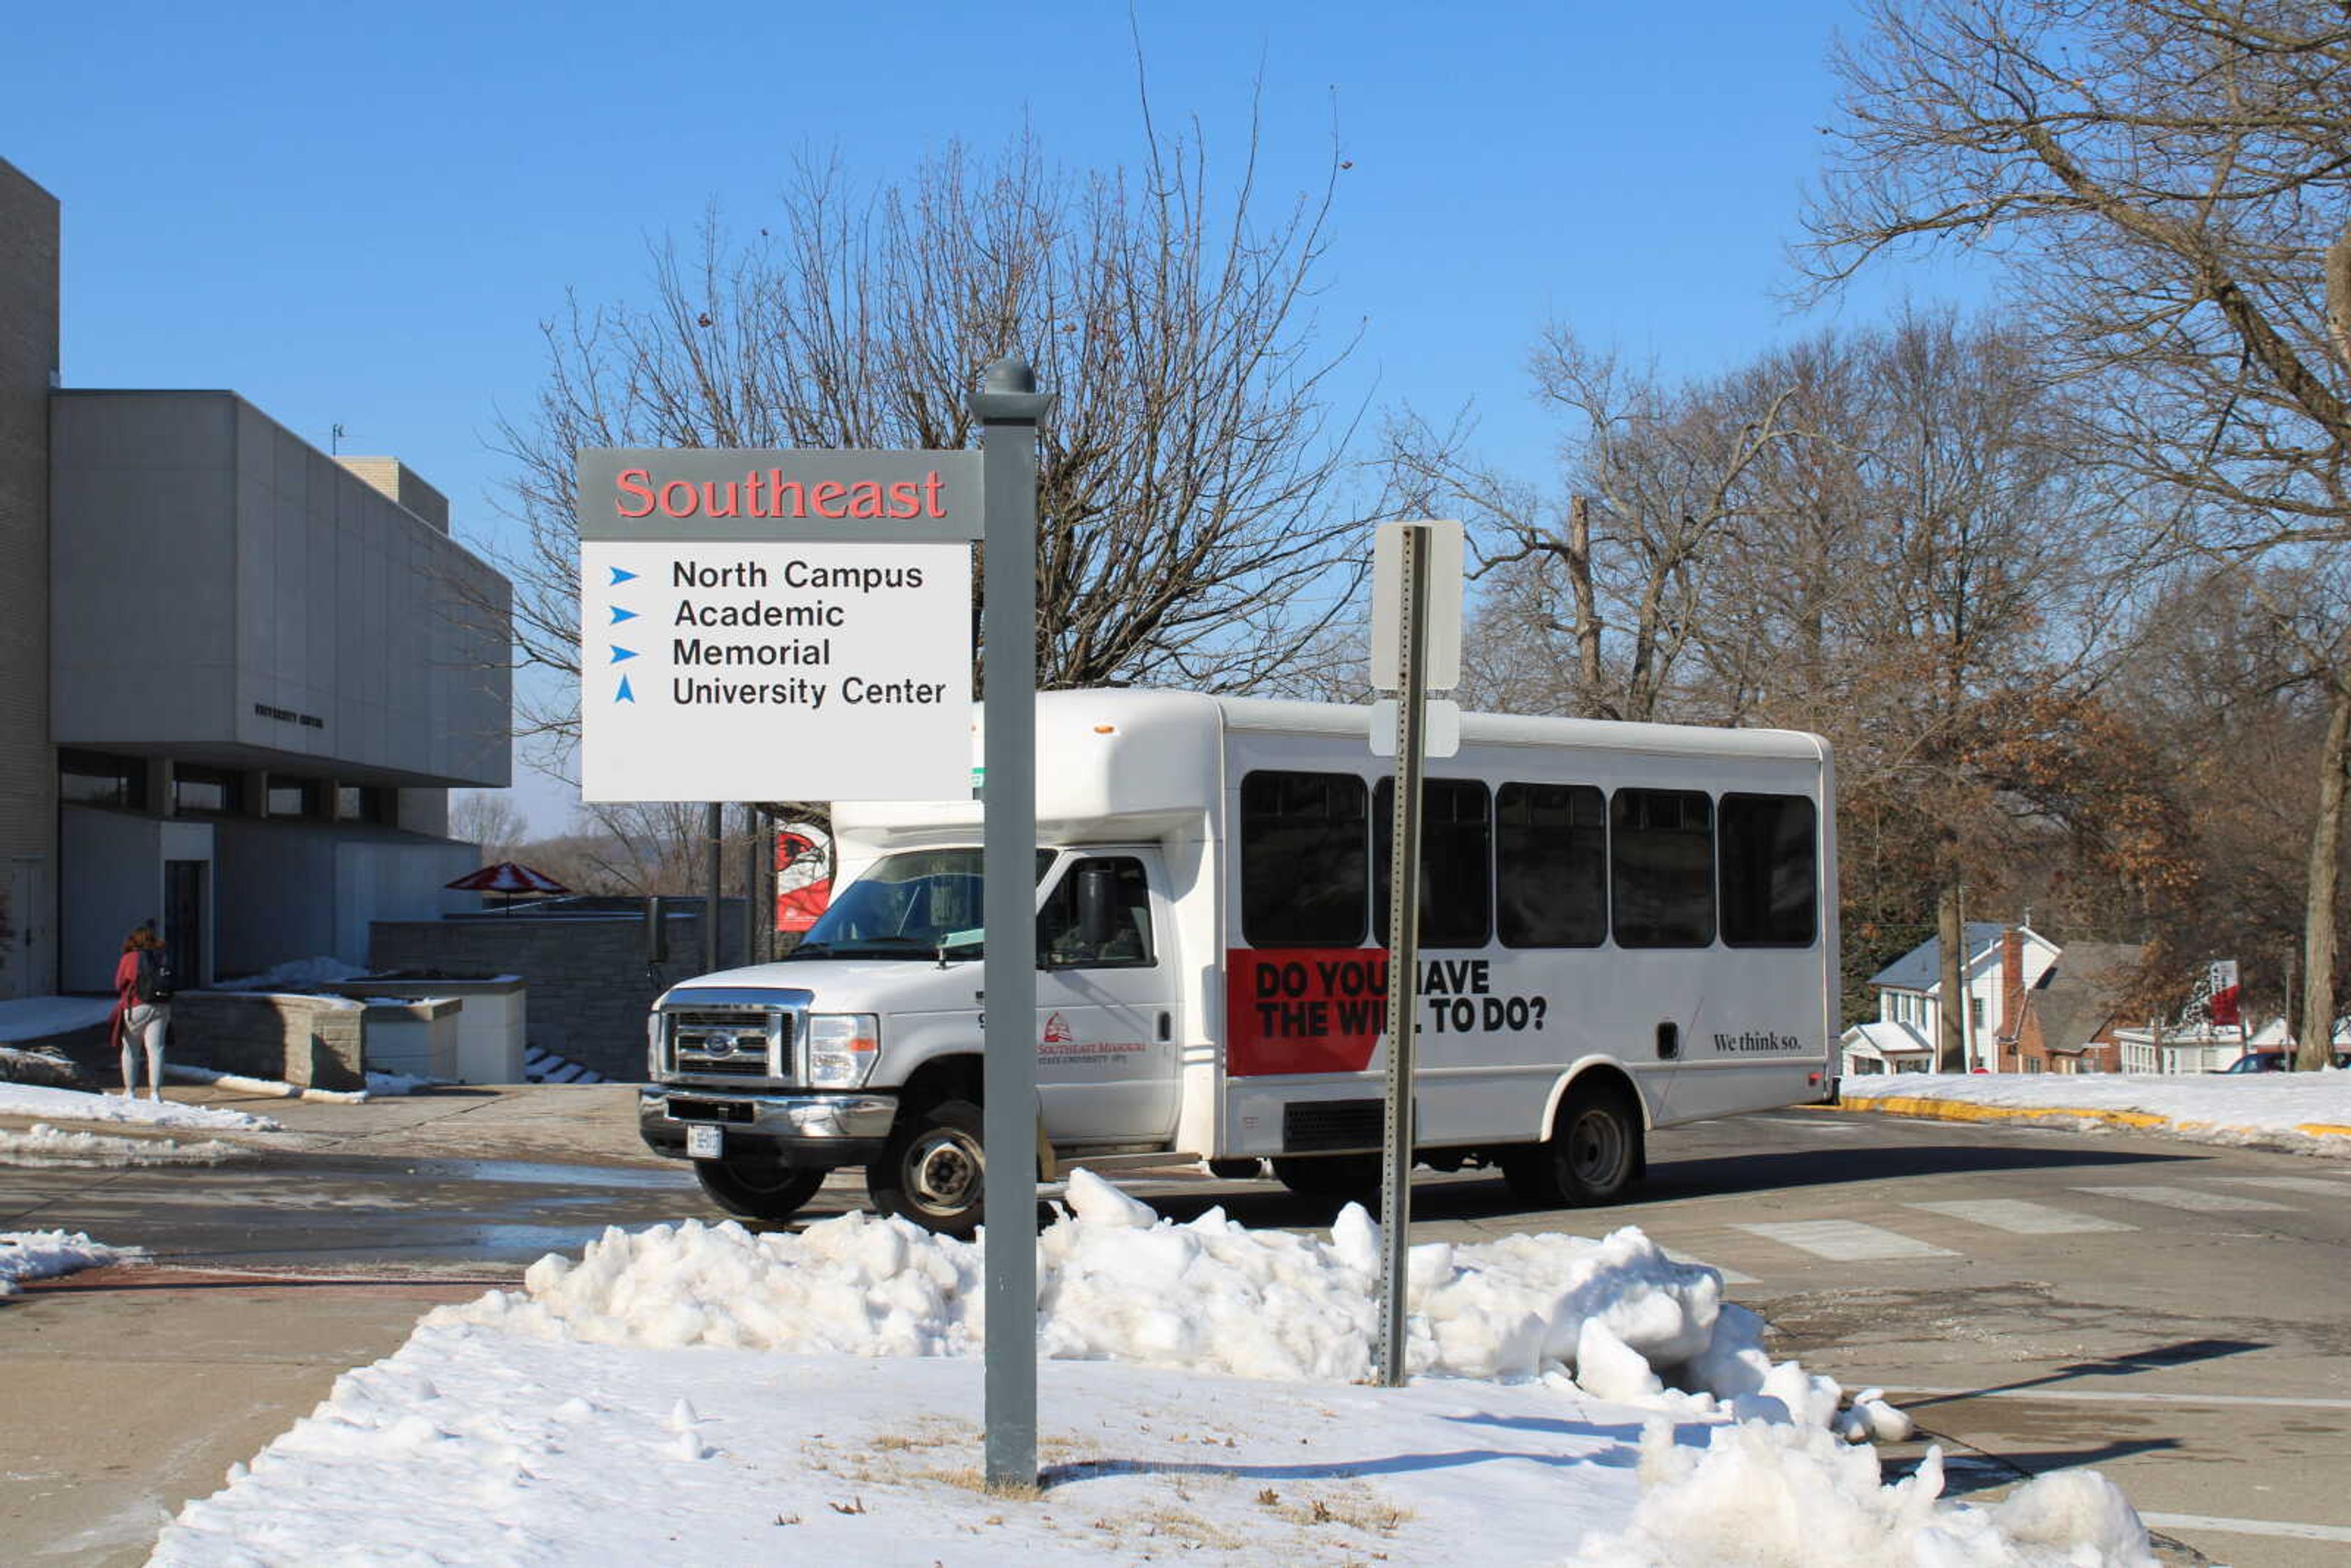 Shuttle tracking service out of operation amid winter weather